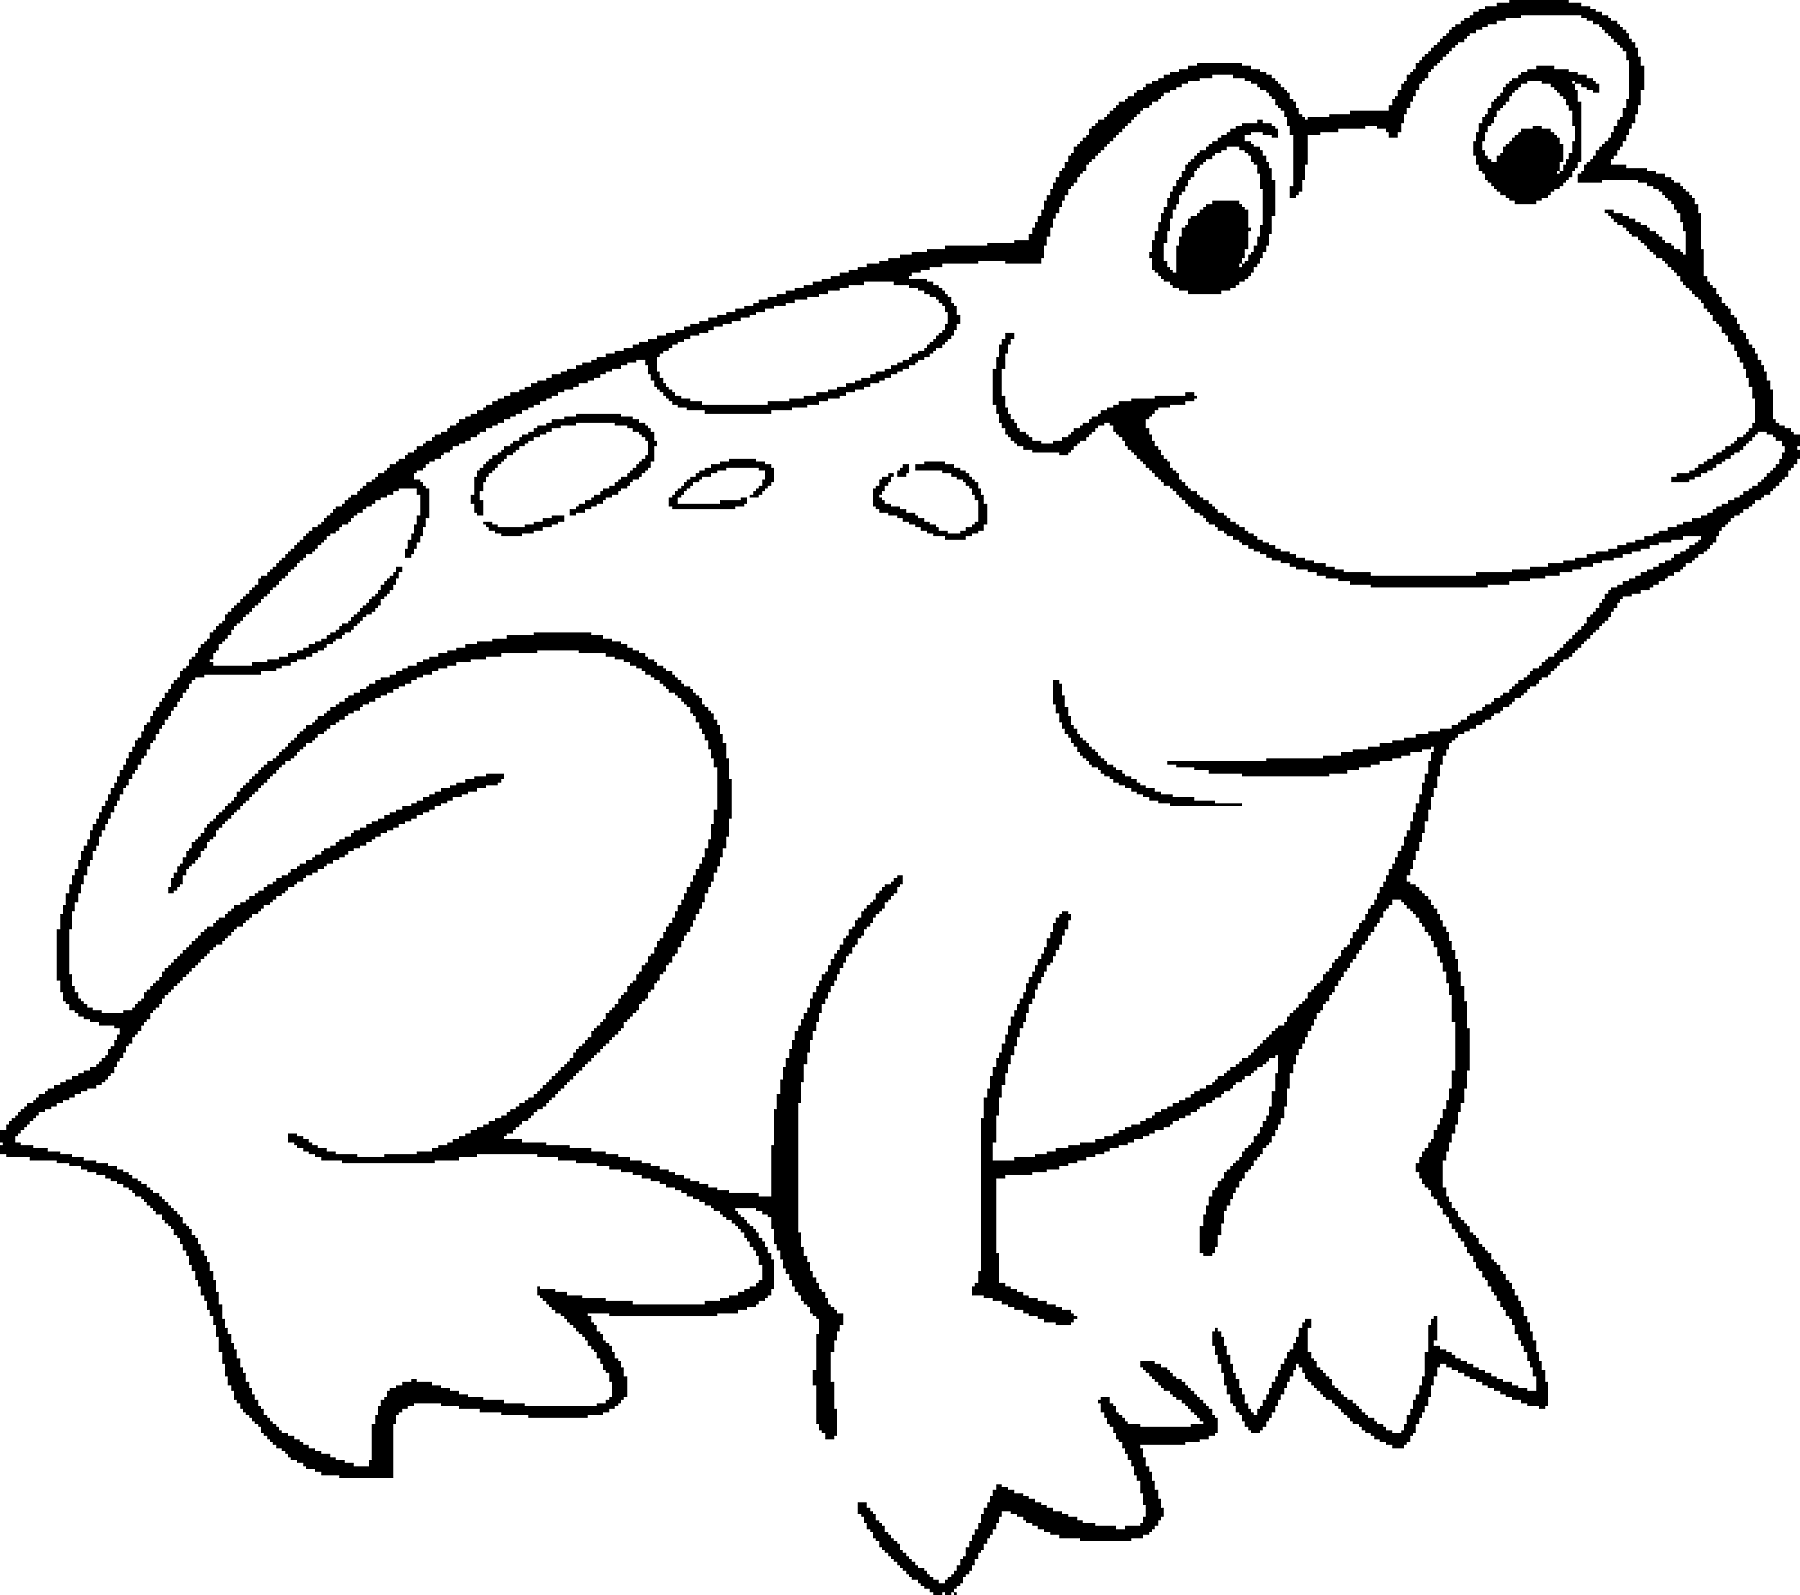 Frog Black and white Drawing 